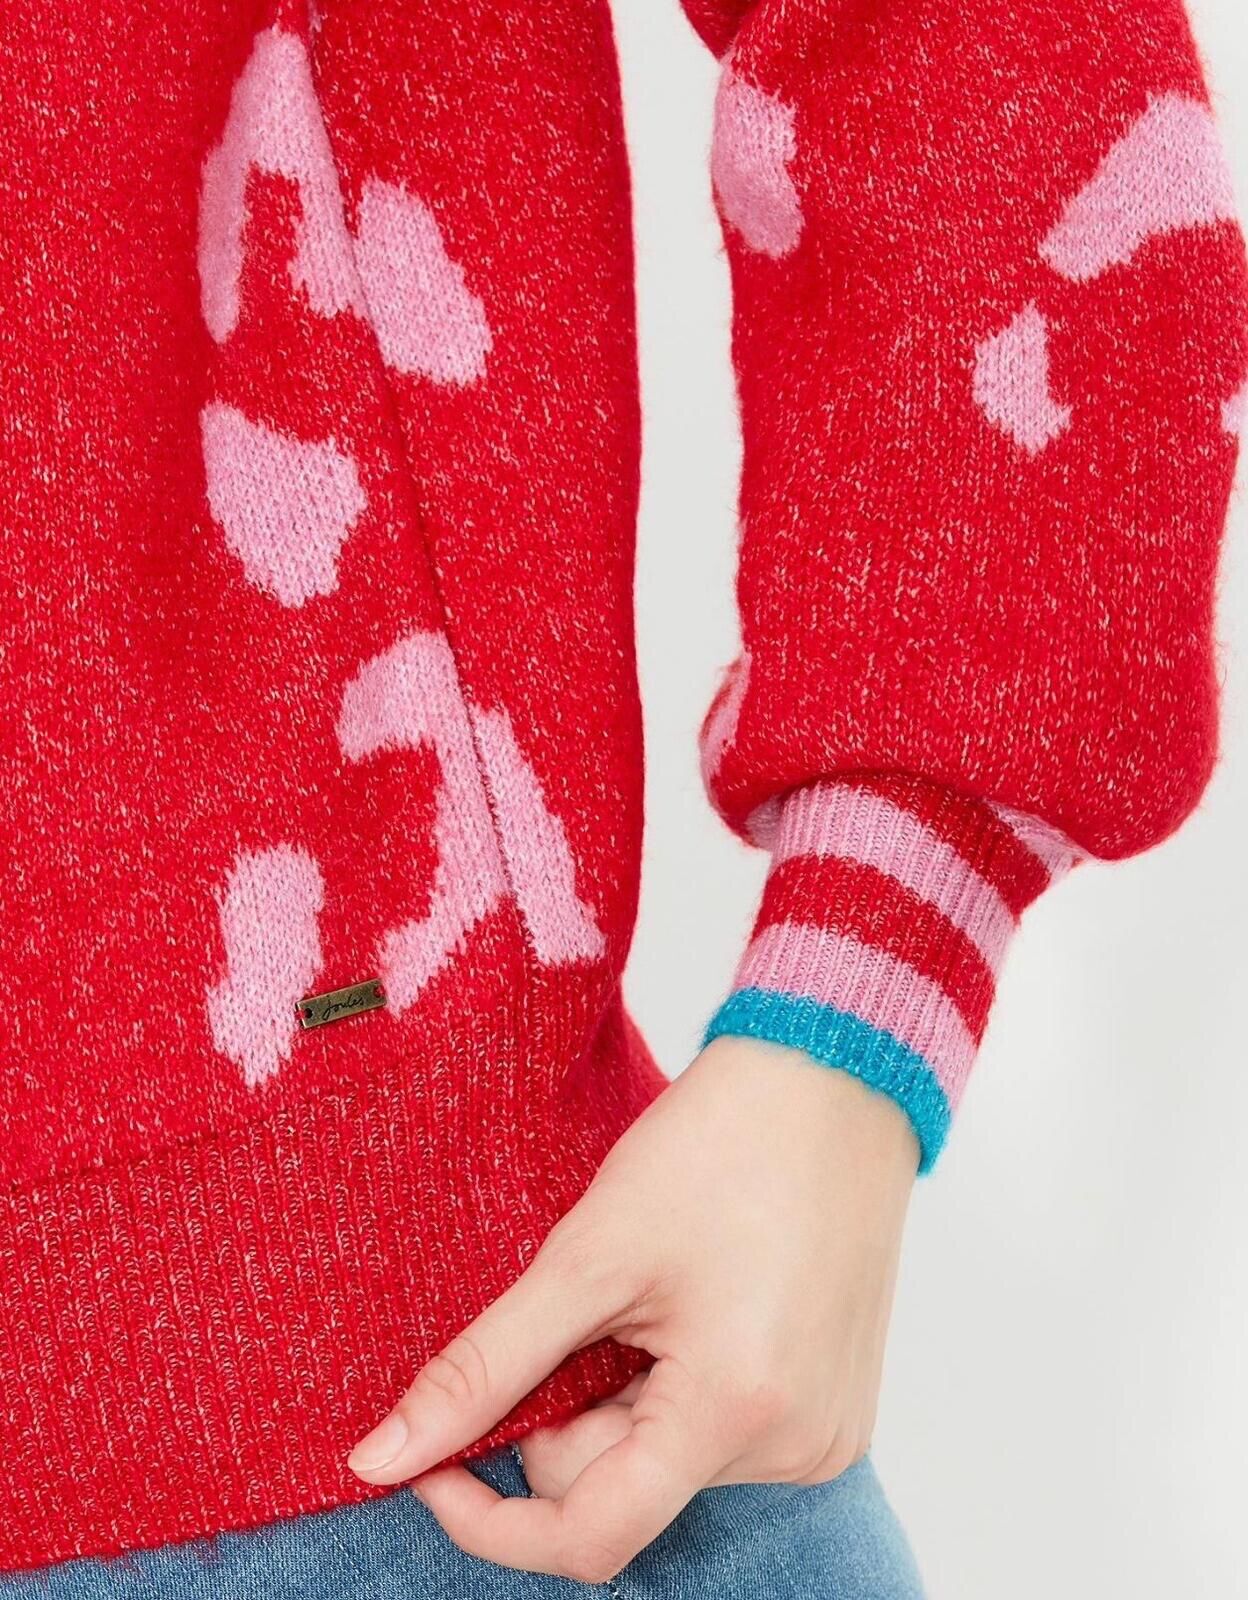 EX Joules Jumper Red Pink Leopard Print Balloon Sleeves Size 8 - 20 RRP £64.95